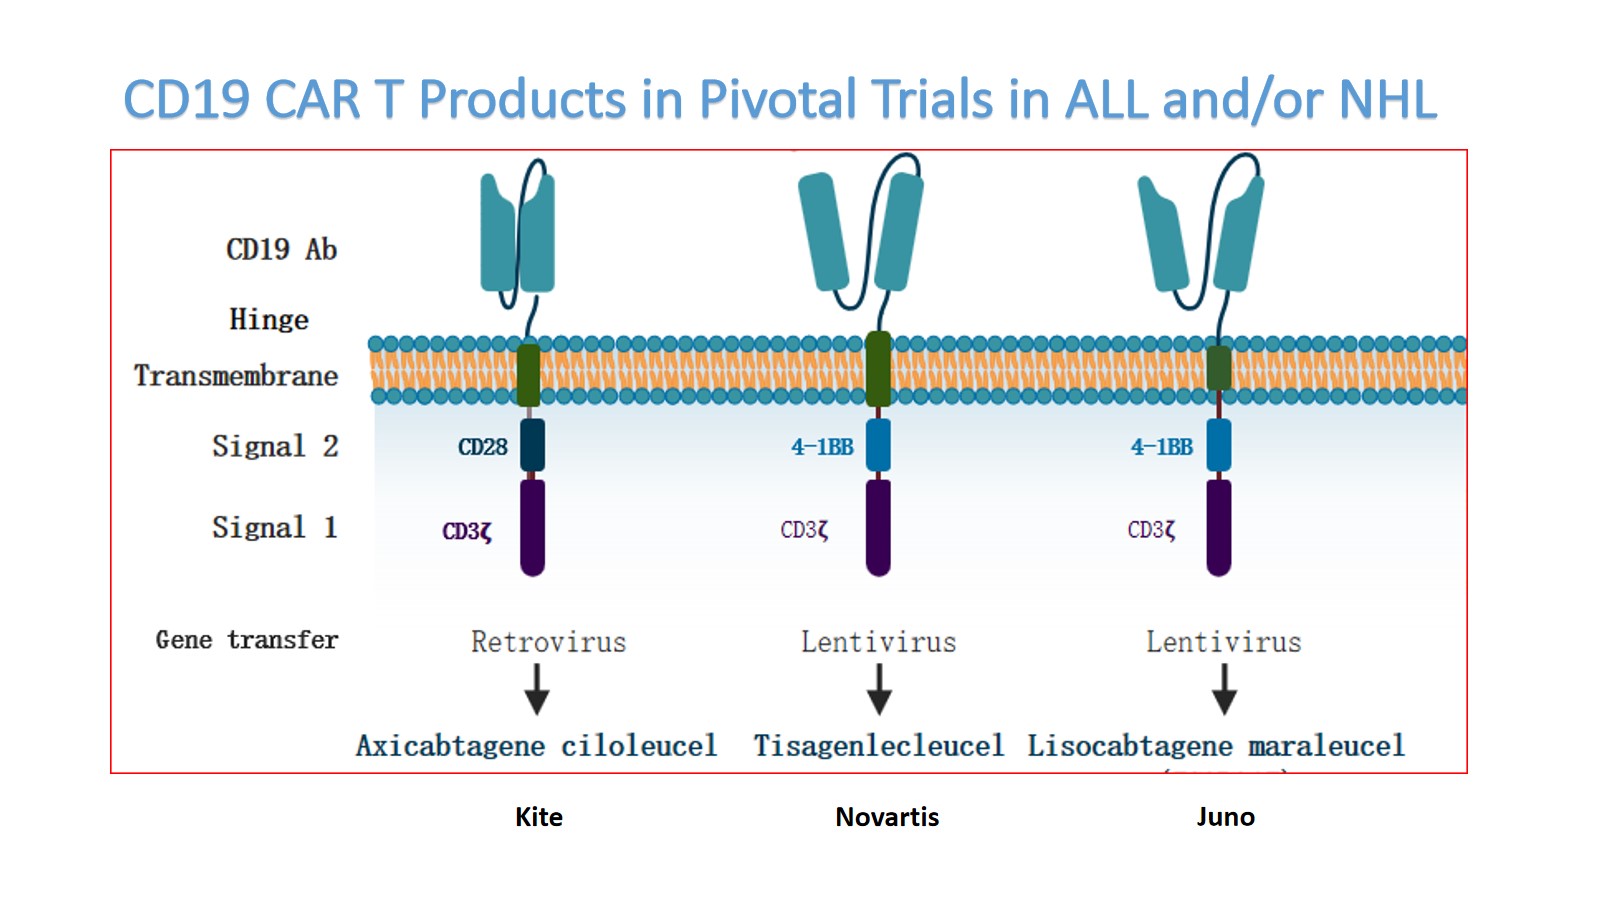 CD19 CAR T Products in Pivotal Trials in ALL and.jpg